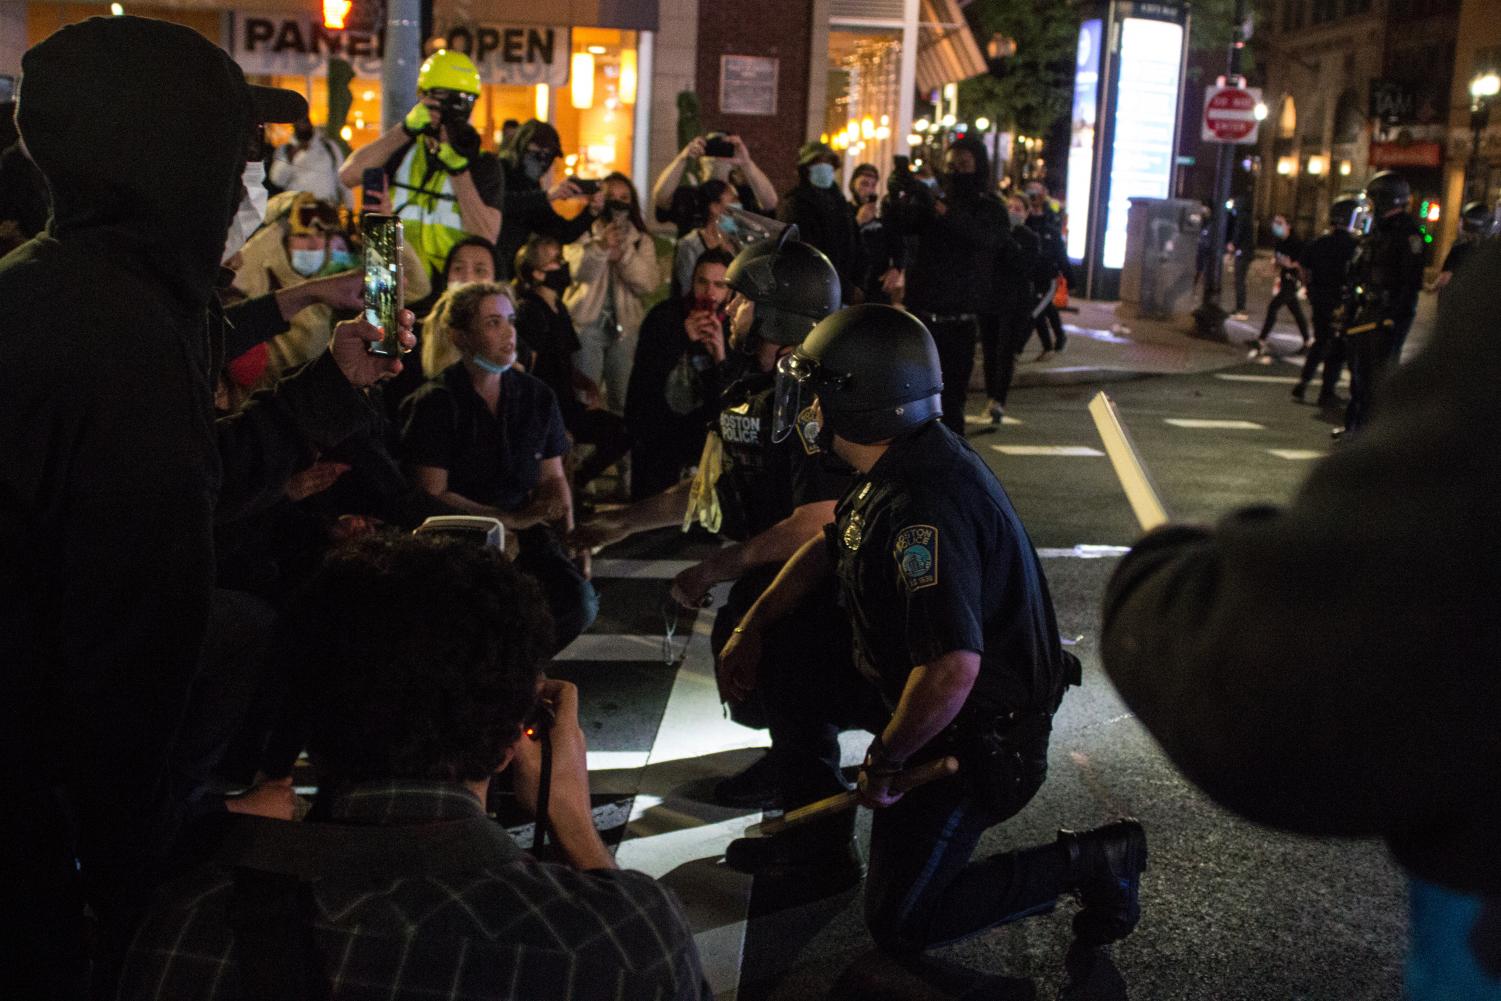 Photos%3A+A+night+of+unrest+in+Boston